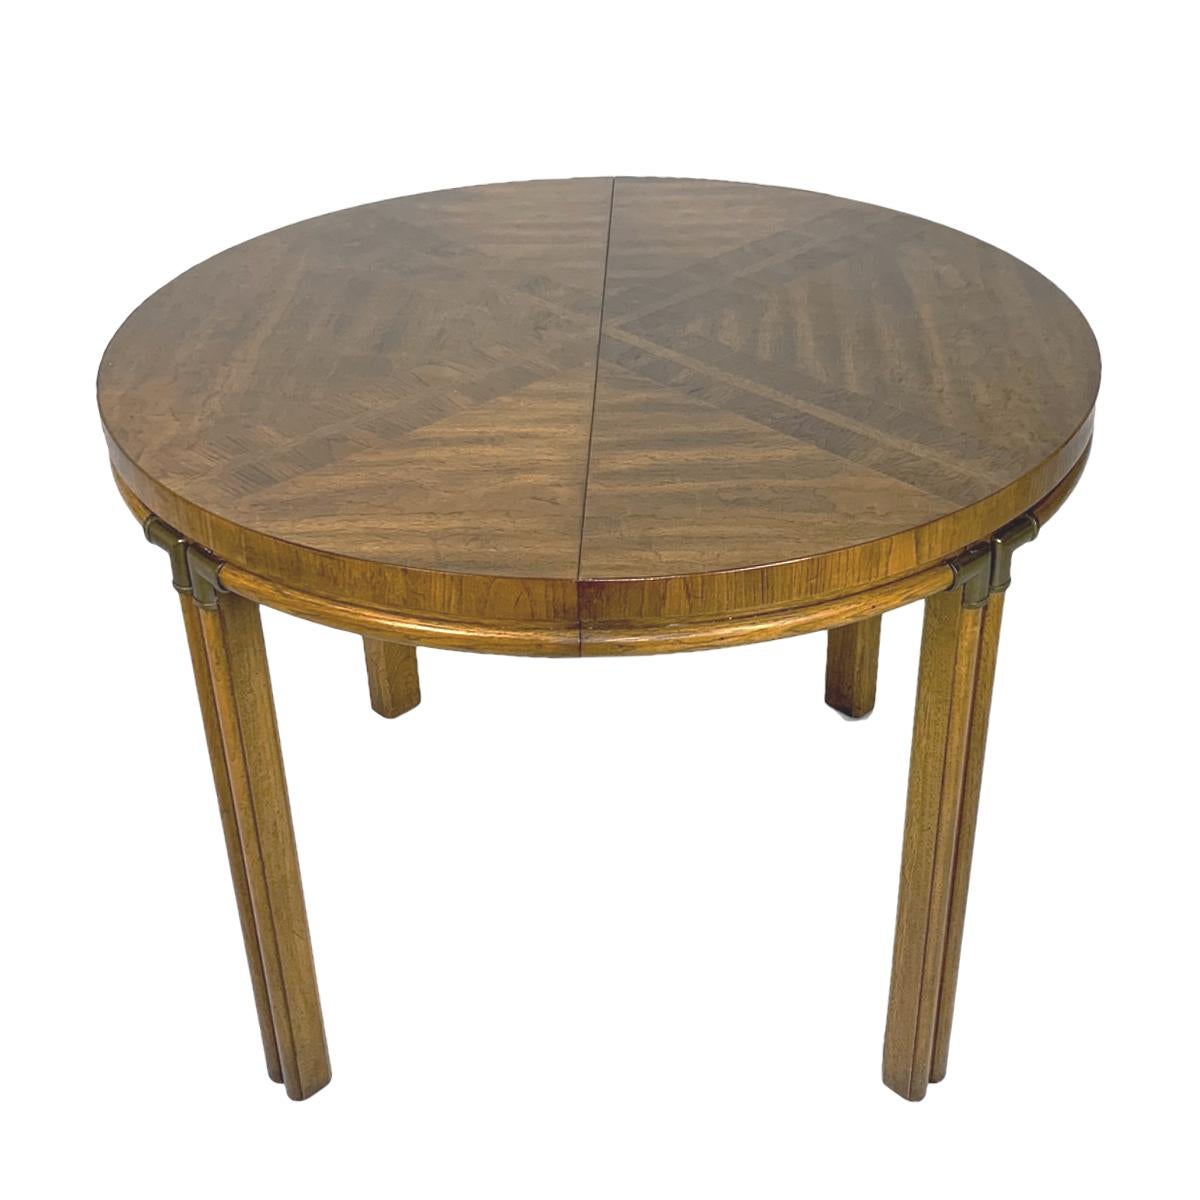 Marquetry Campaign Inlaid Burl & Pecan Round to Oval Dining Table with 2 Extension Leaves